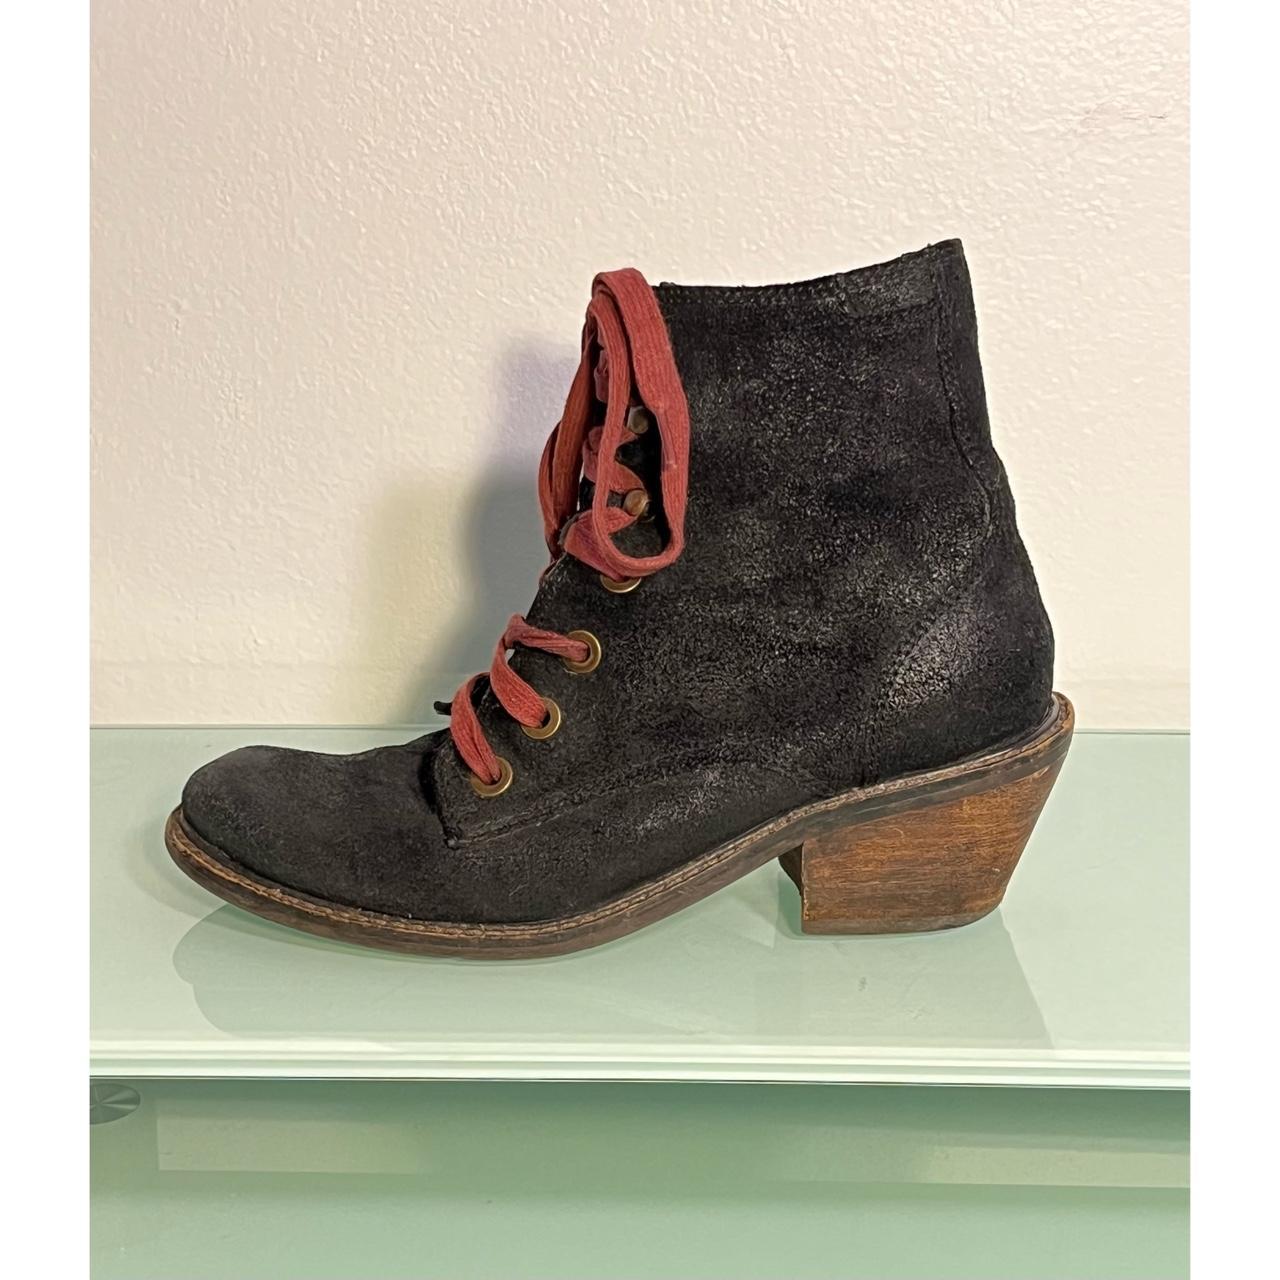 Dolce Vita Women's Black and Burgundy Boots